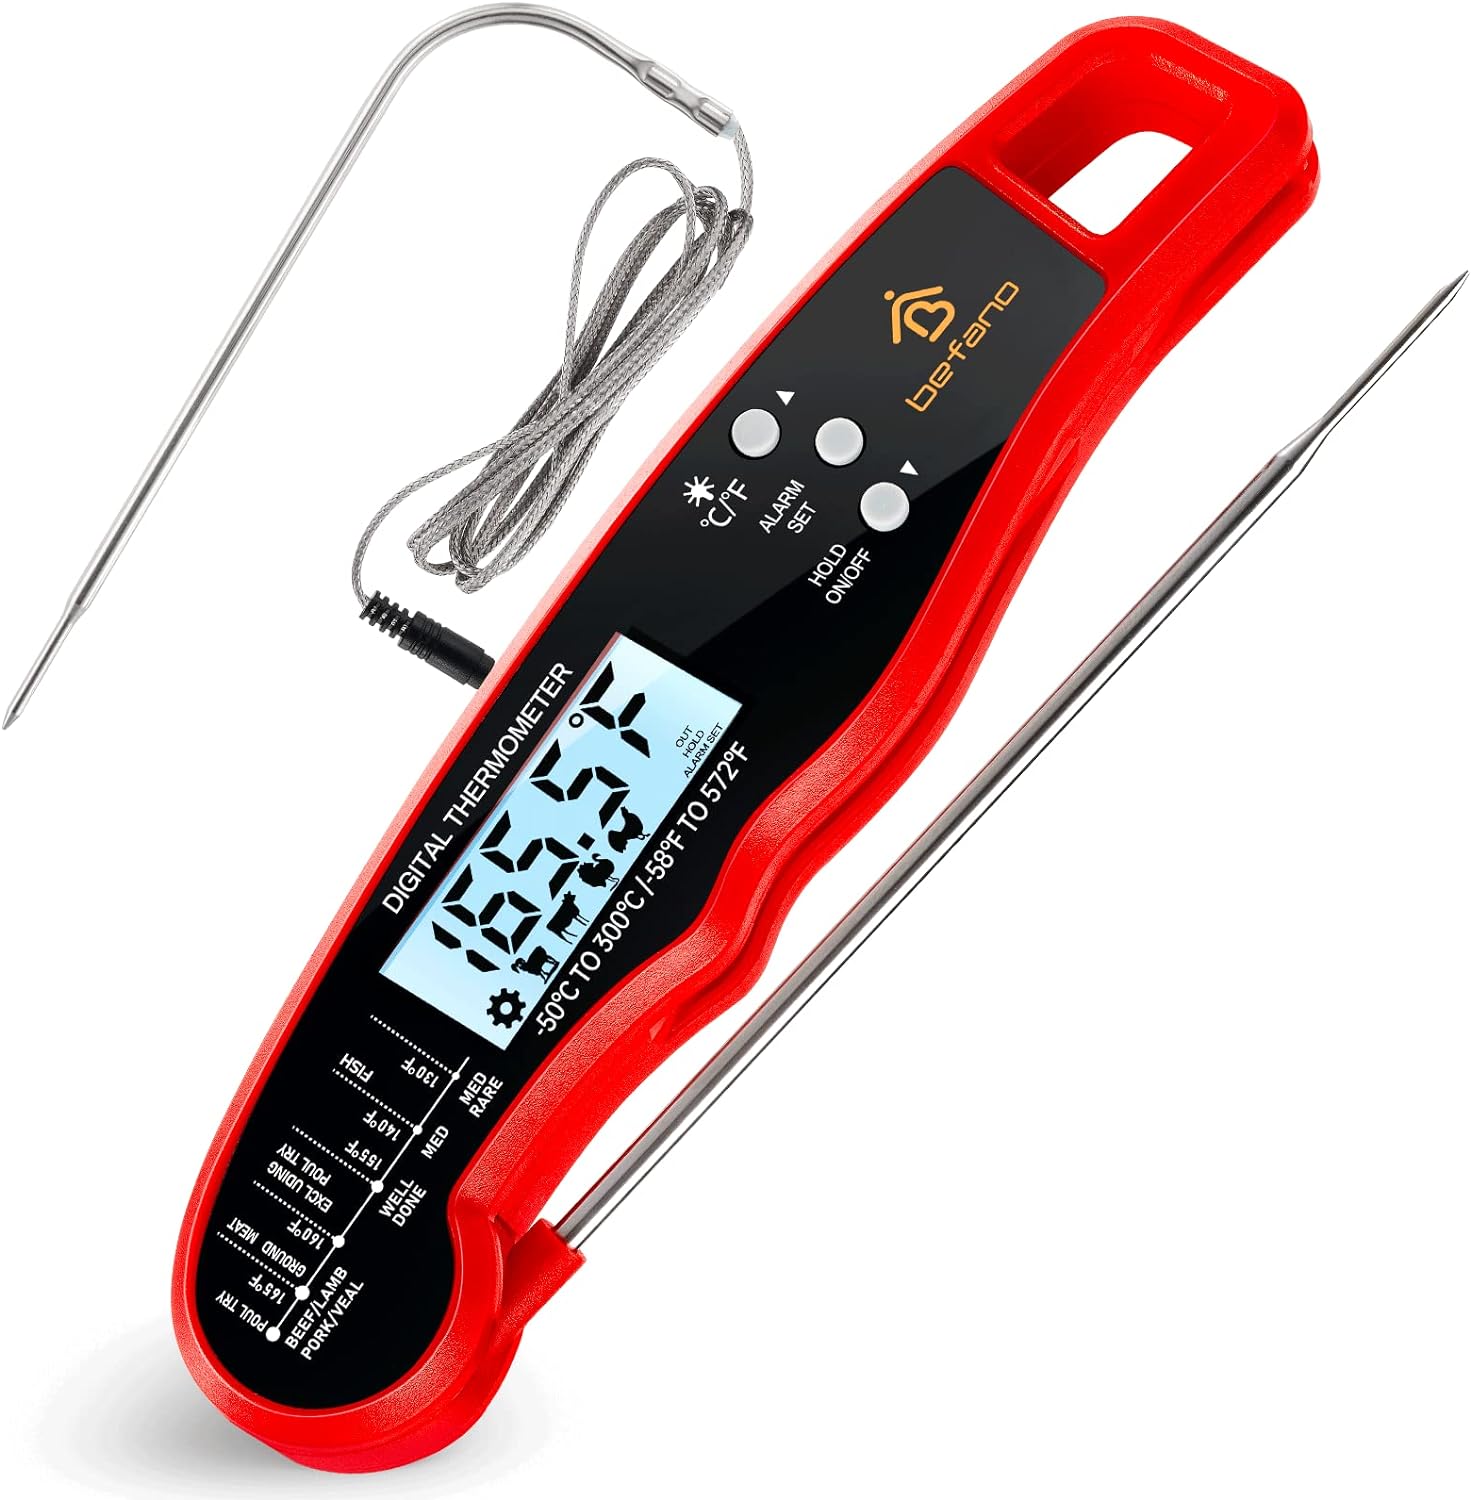 Befano Digital Meat Thermometer Instant Read, Waterproof Meat Thermometer with Backlight(No Batttery Included, Require 1PC Button Battery 2032 3V)